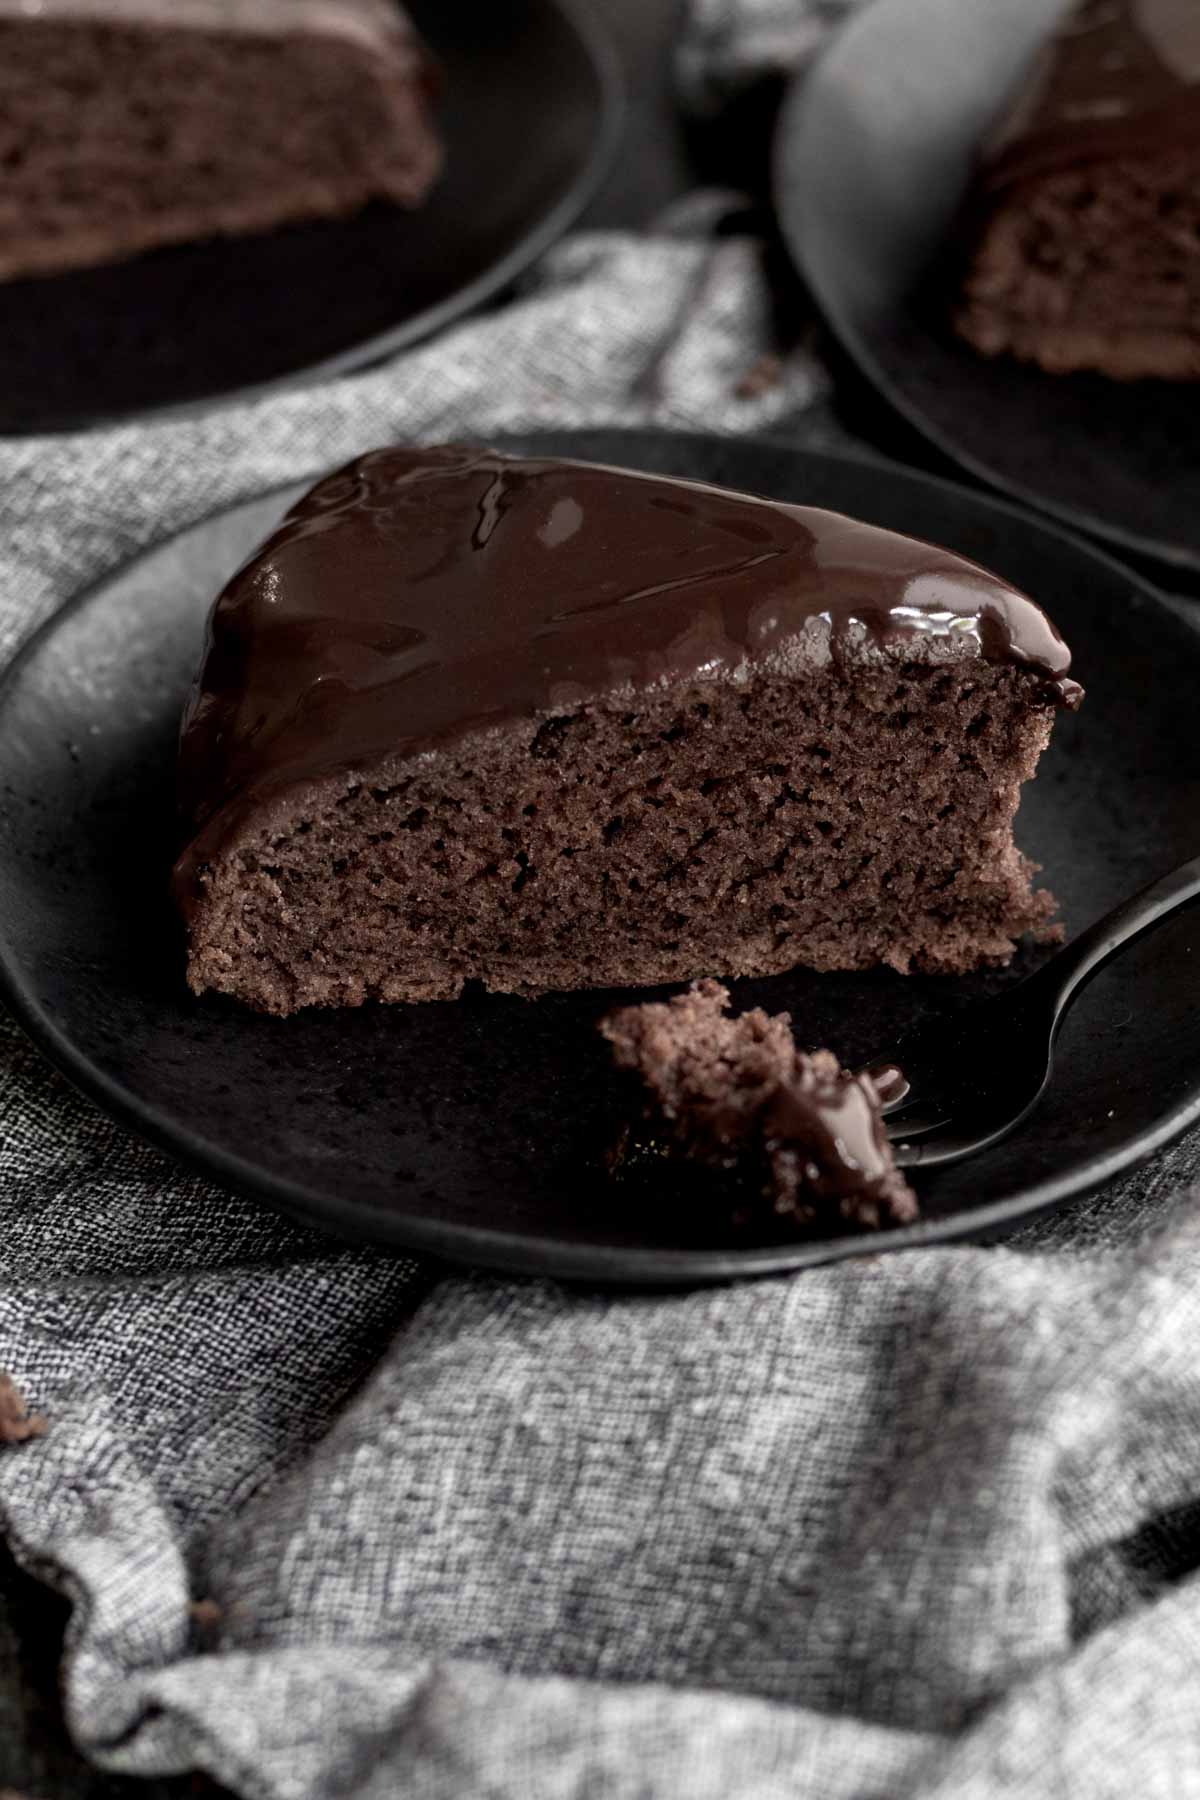 A slice of chocolate glazed cake on a plate with a fork.